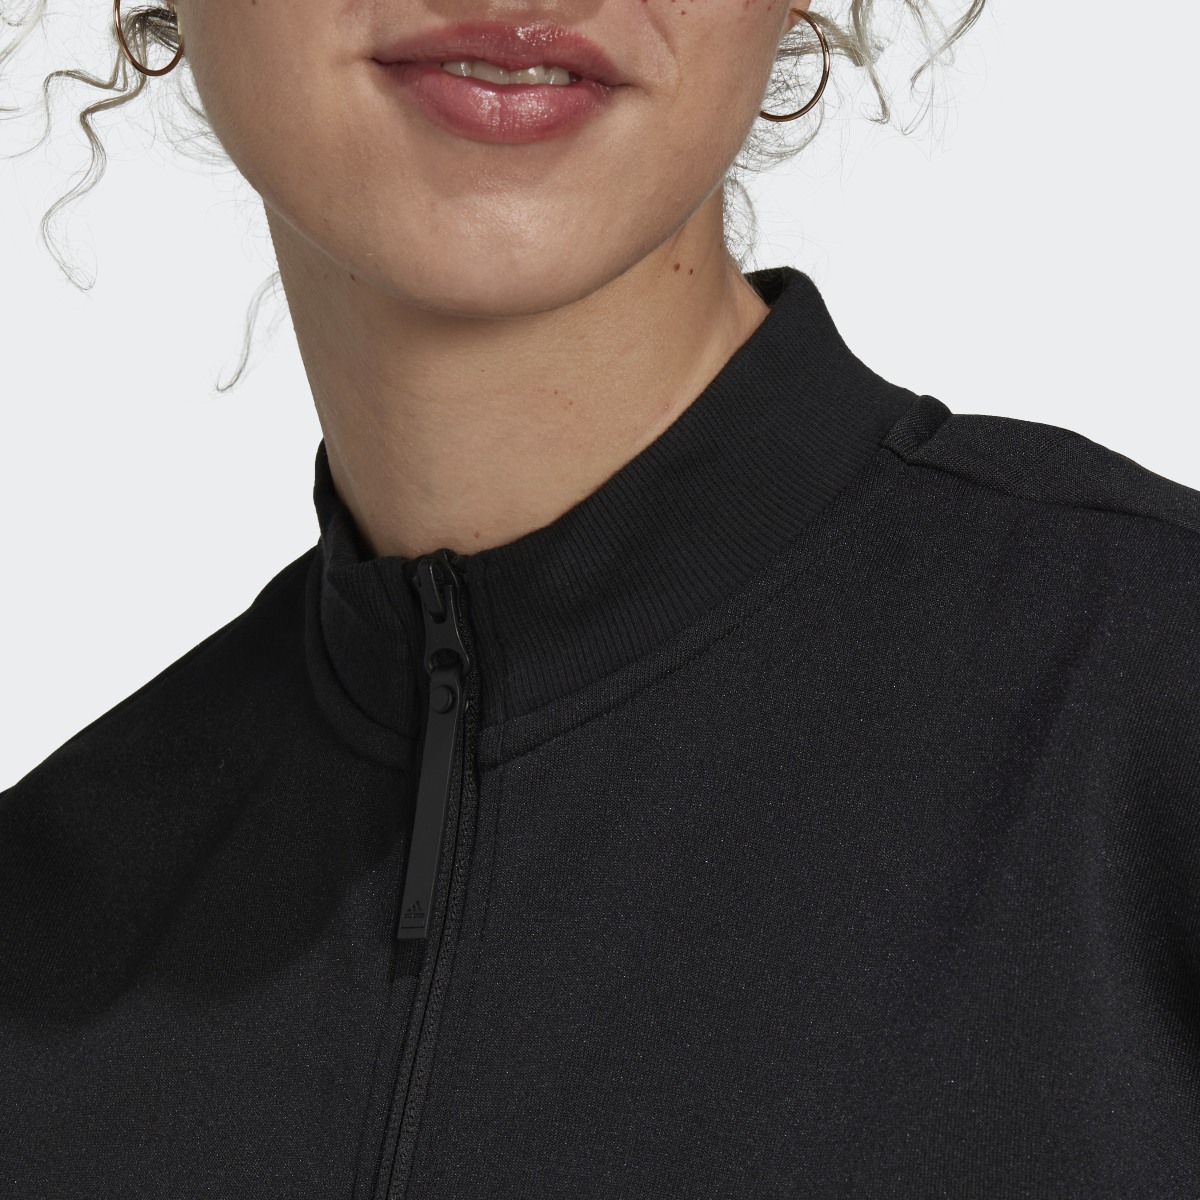 Adidas Cropped Track Top. 9